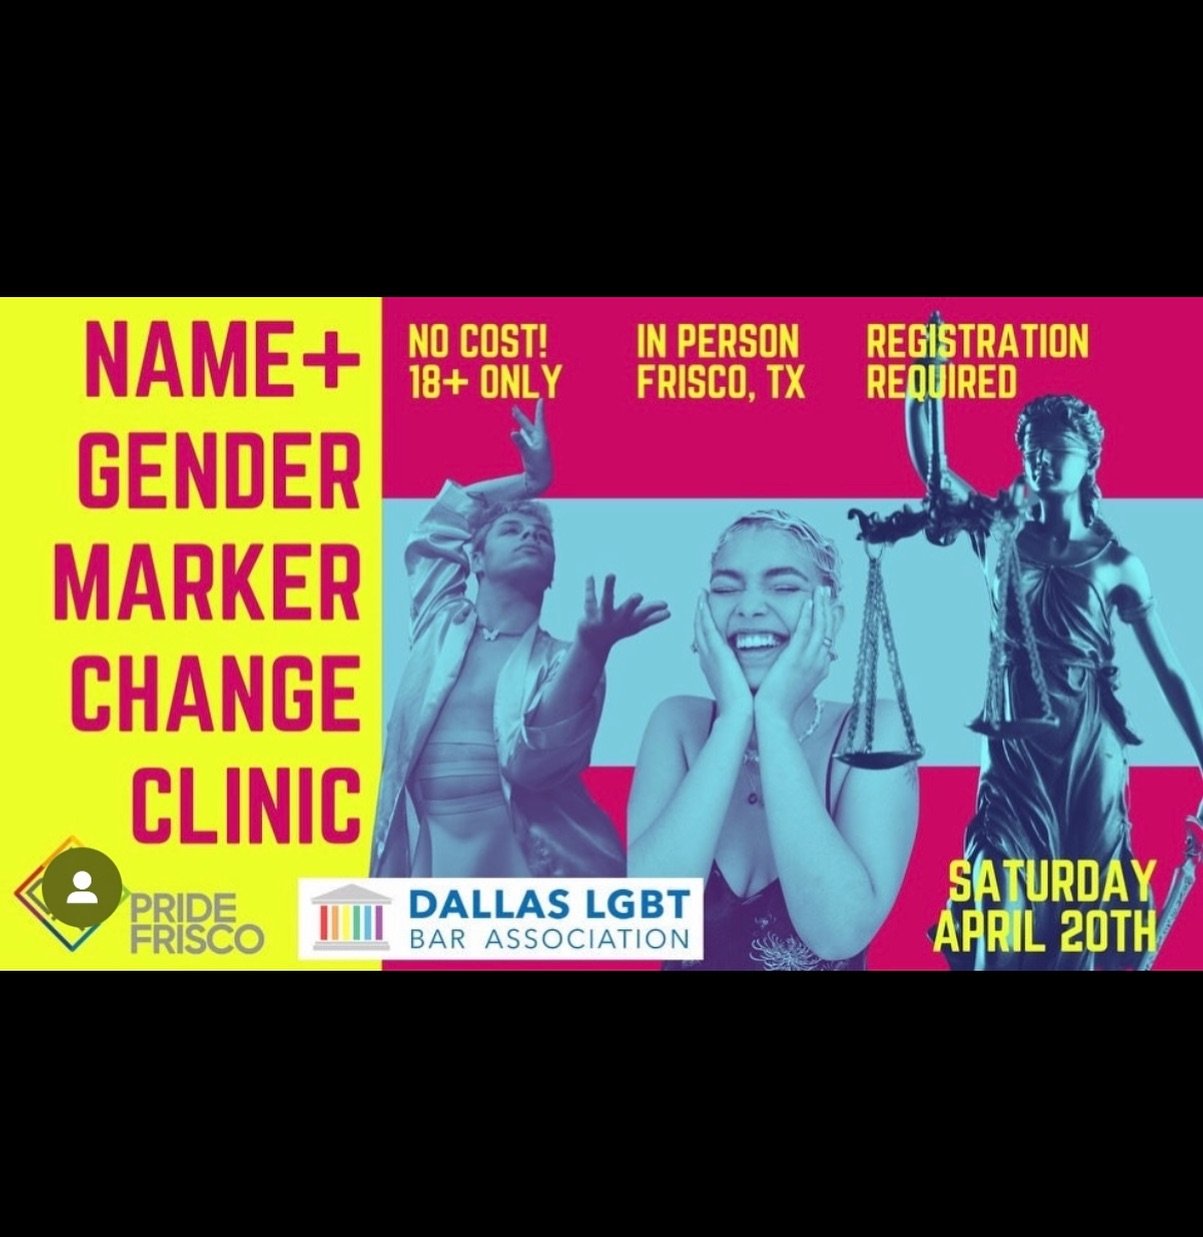 Need a name or gender marker correction in Texas? Register for this ✨FREE legal clinic ✨from @dallaslgbtbar + @pridefrisco!! We'll be there writing free support letters + sharing resources 🌈

 #transtexas #queertexas #lgbtq #namechange #gendermarker